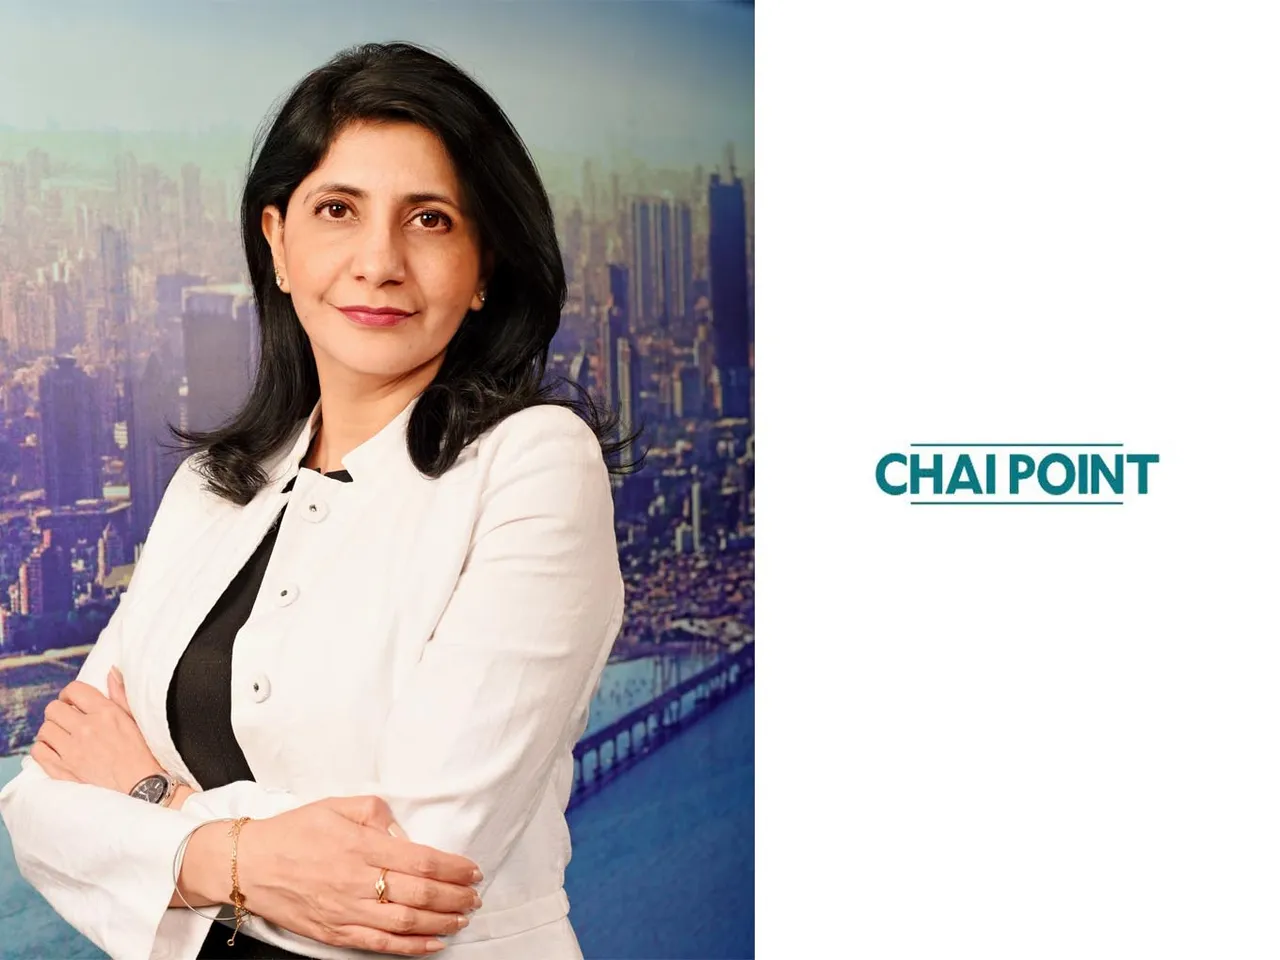 Chai Point appoints Manmeet Vohra as Chief Brand and Digital Officer